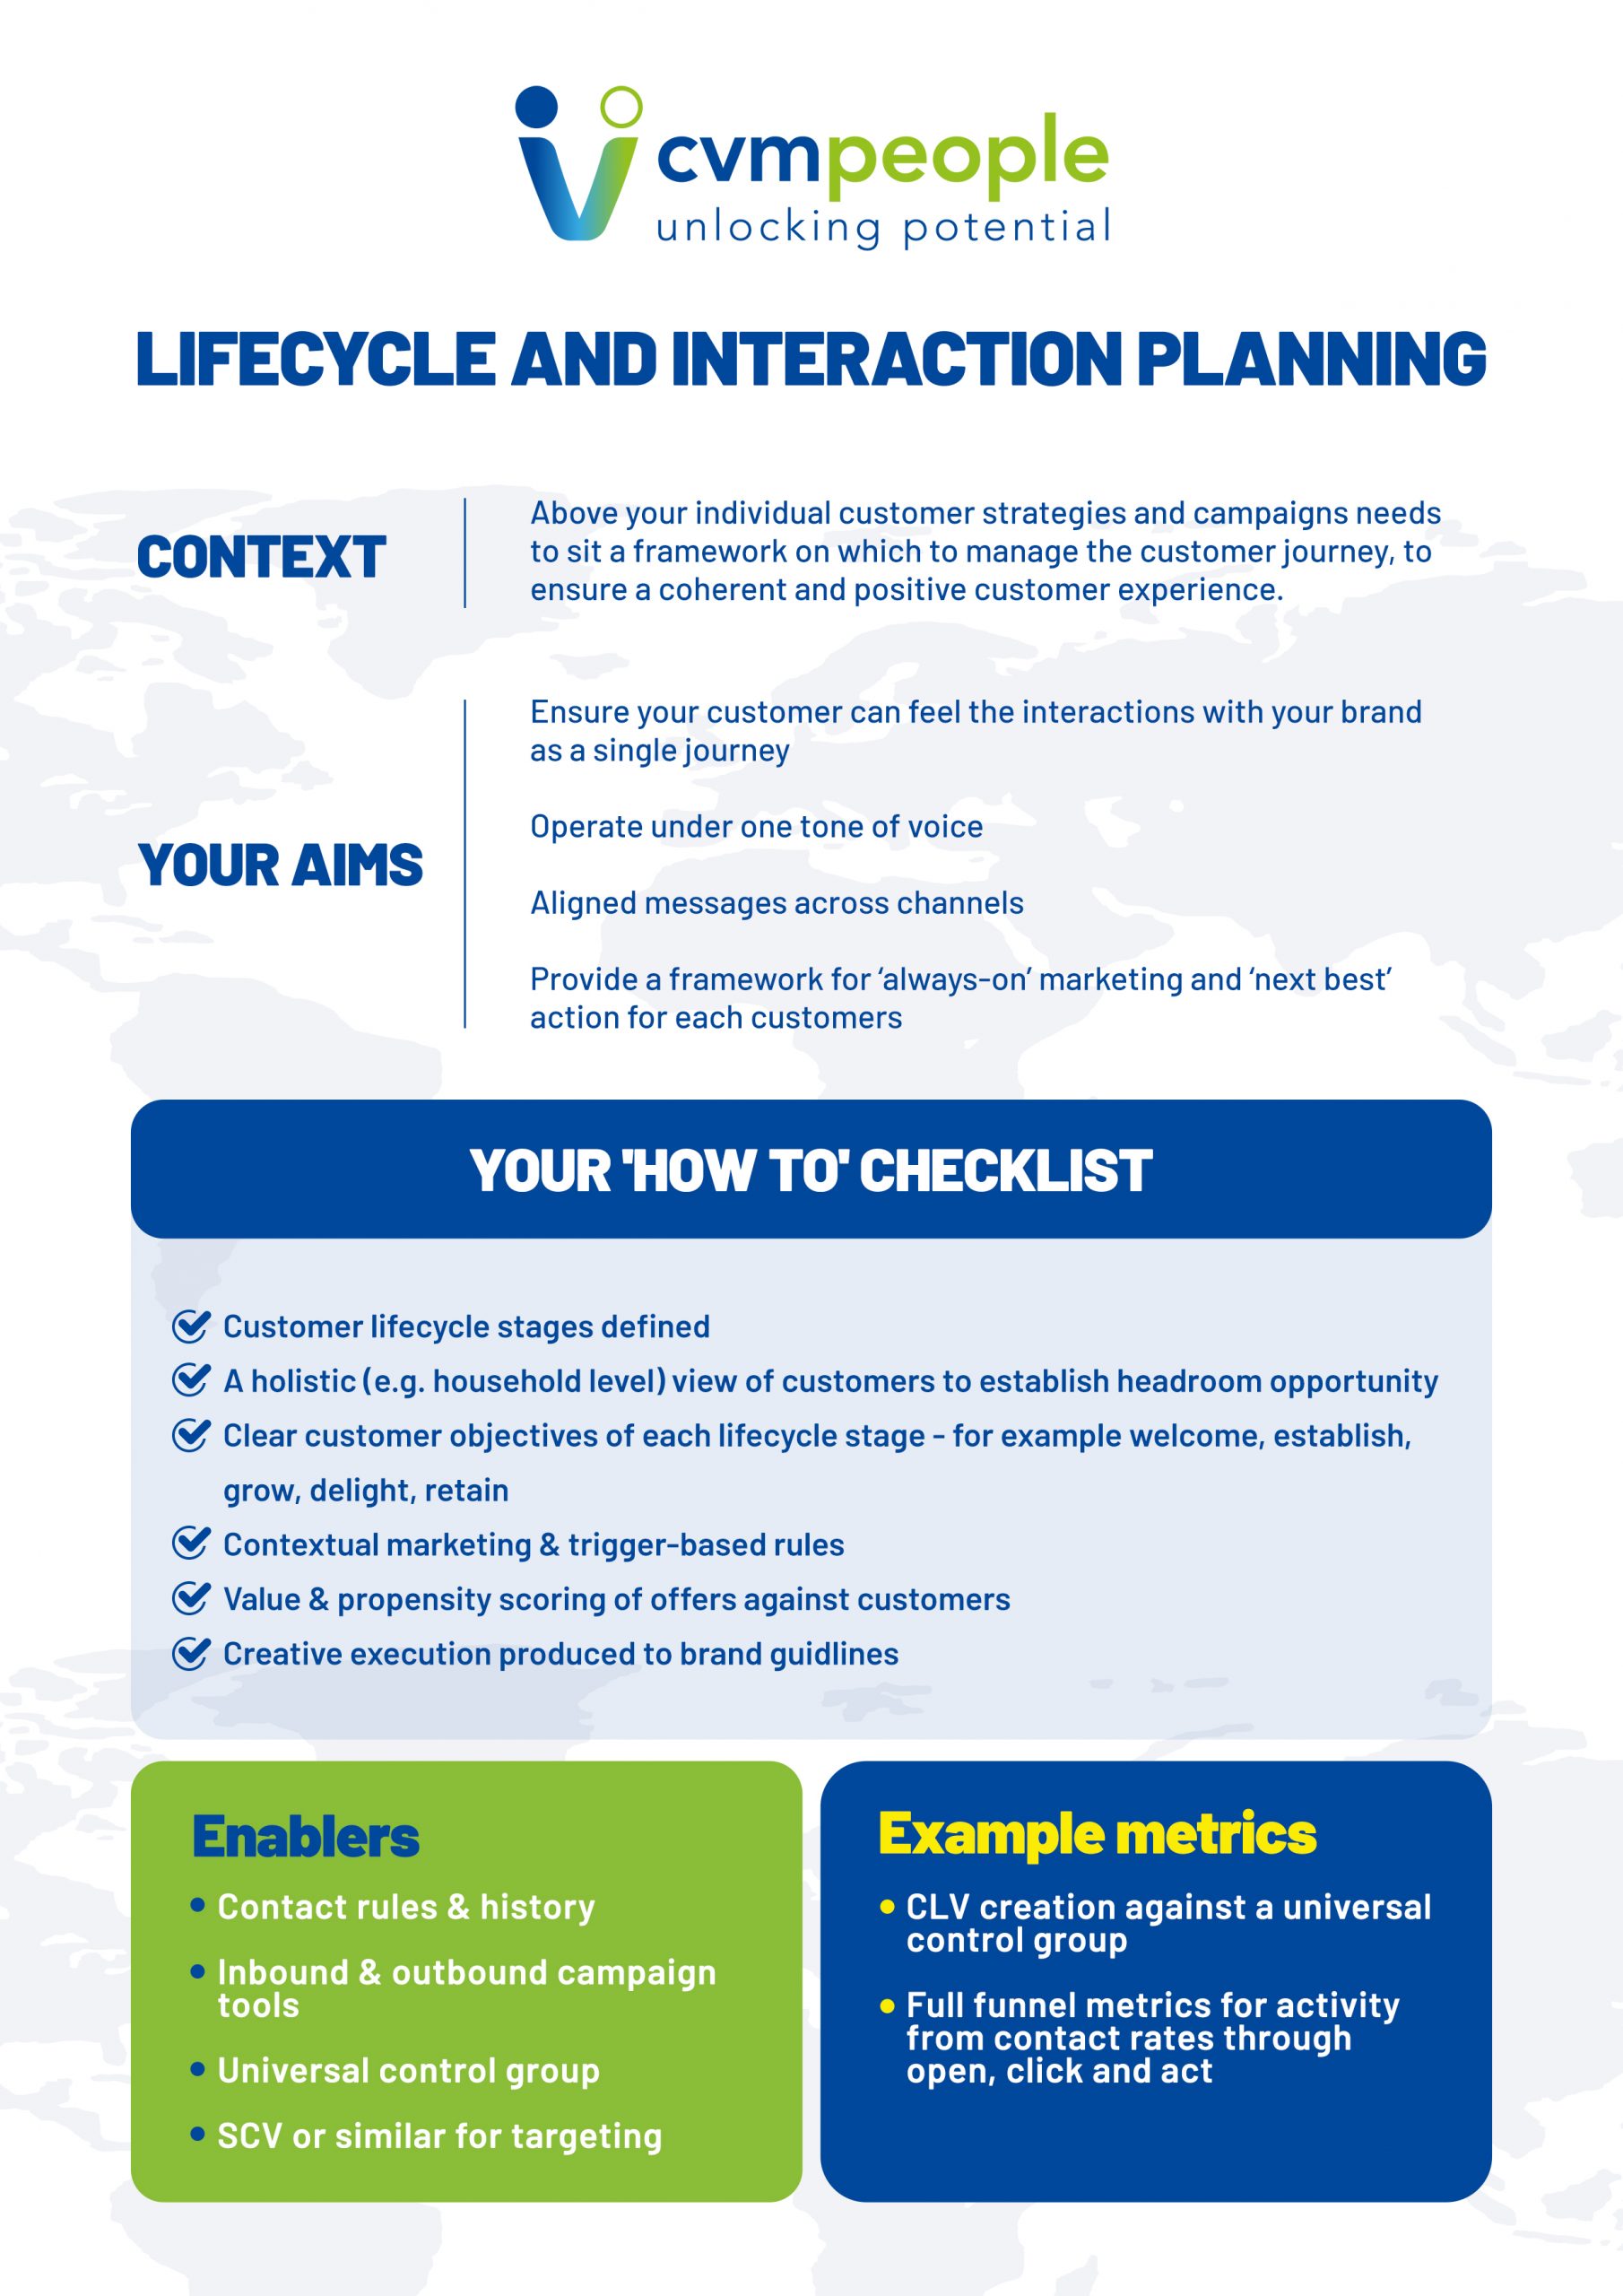 Unlocking Customer Value - Lifecycle and Interaction Planning